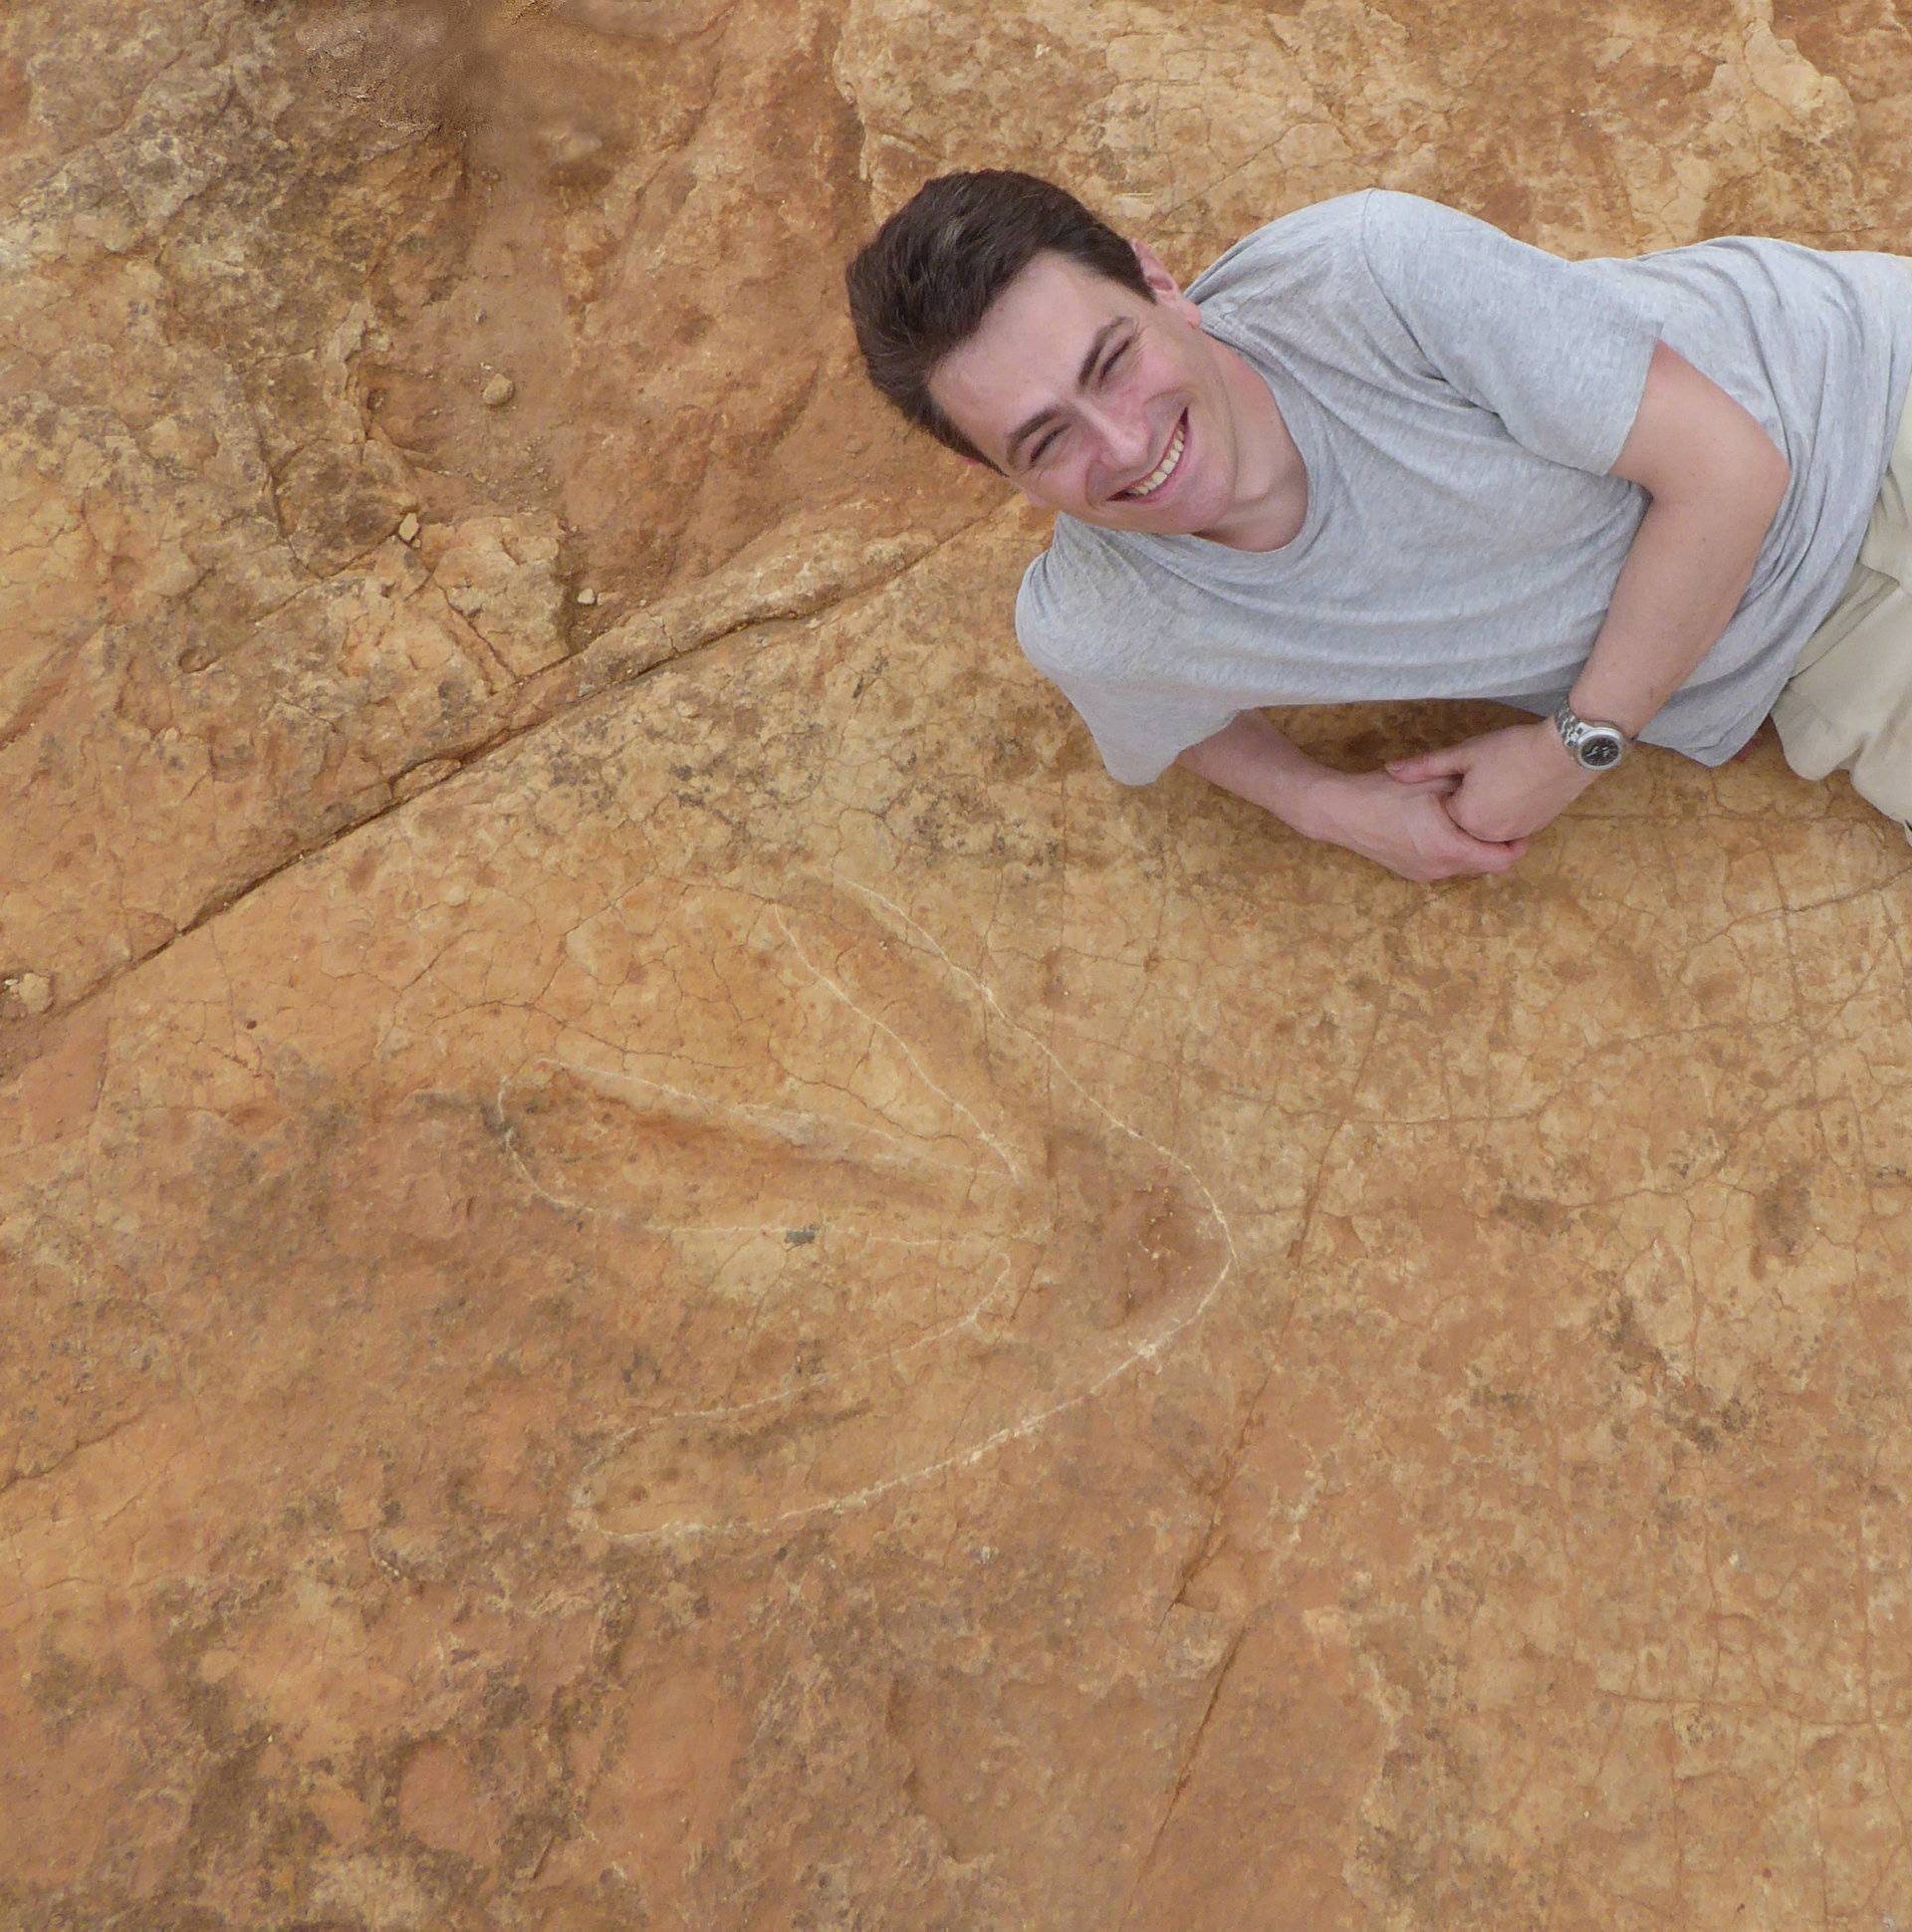 Fabien Knoll, Honorary Senior Research Fellow at the University of Manchester, lies next to the exceptionally large carnivorous dinosaur footprints found in Lesotho, Africa in this handout photo